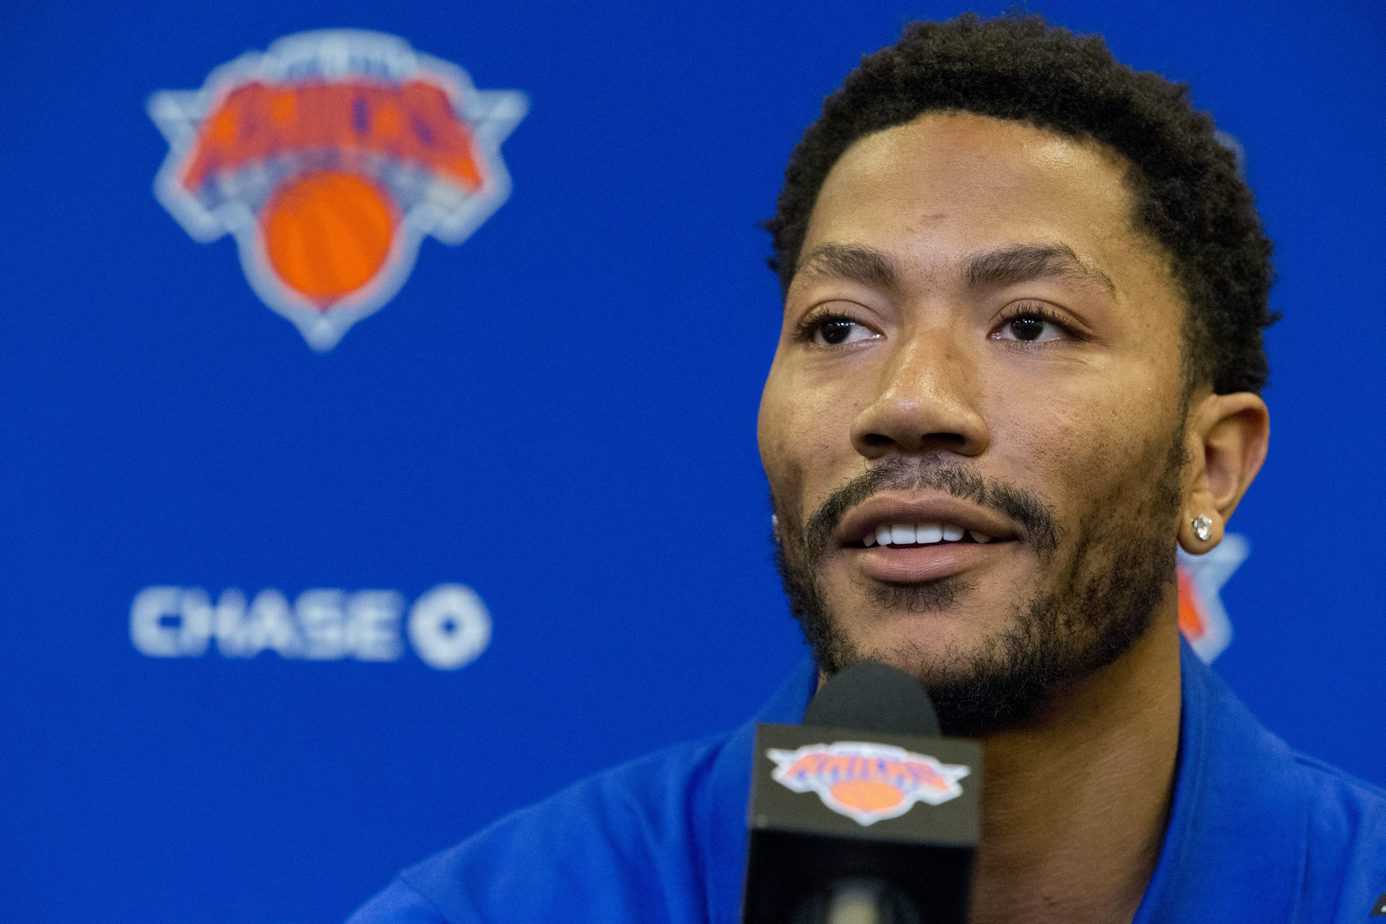 New York Knicks point guard Derrick Rose used Madison Square Garden for an epic engagement dinner with longtime girlfriend, Alaina Anderson